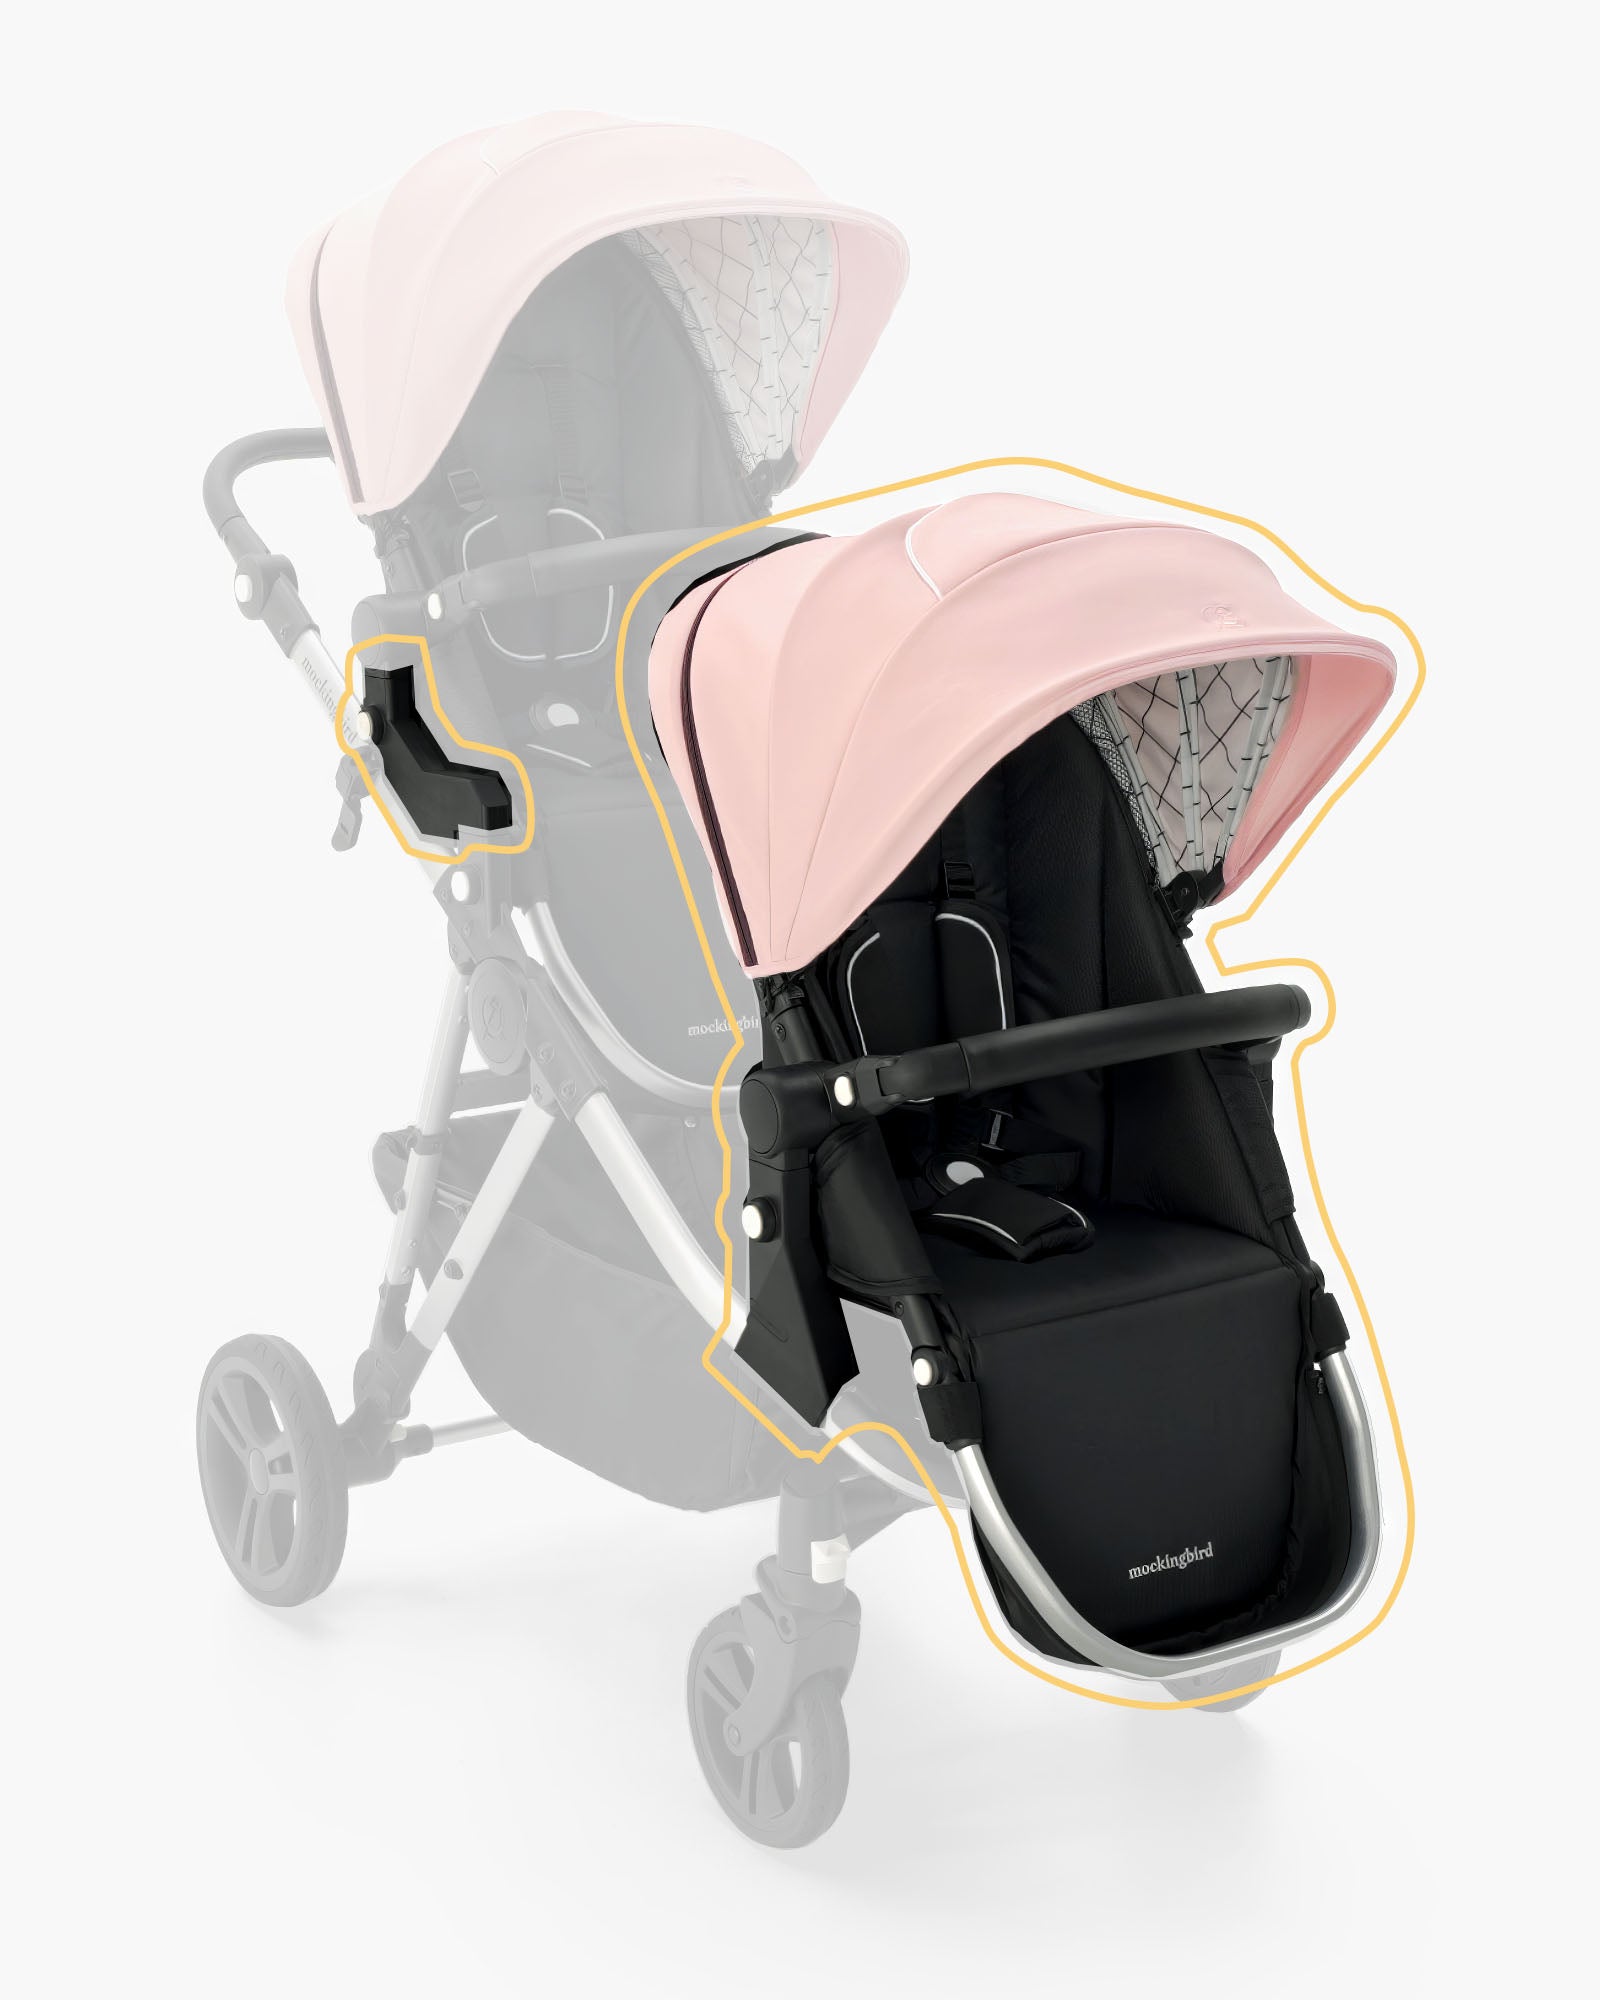 A modern single-to-double baby stroller with a pink extendable canopy, black seat, and gray frame, depicted in a minimalistic white background. The mockingbird 2nd Seat Kit 2.0. #color_bloom